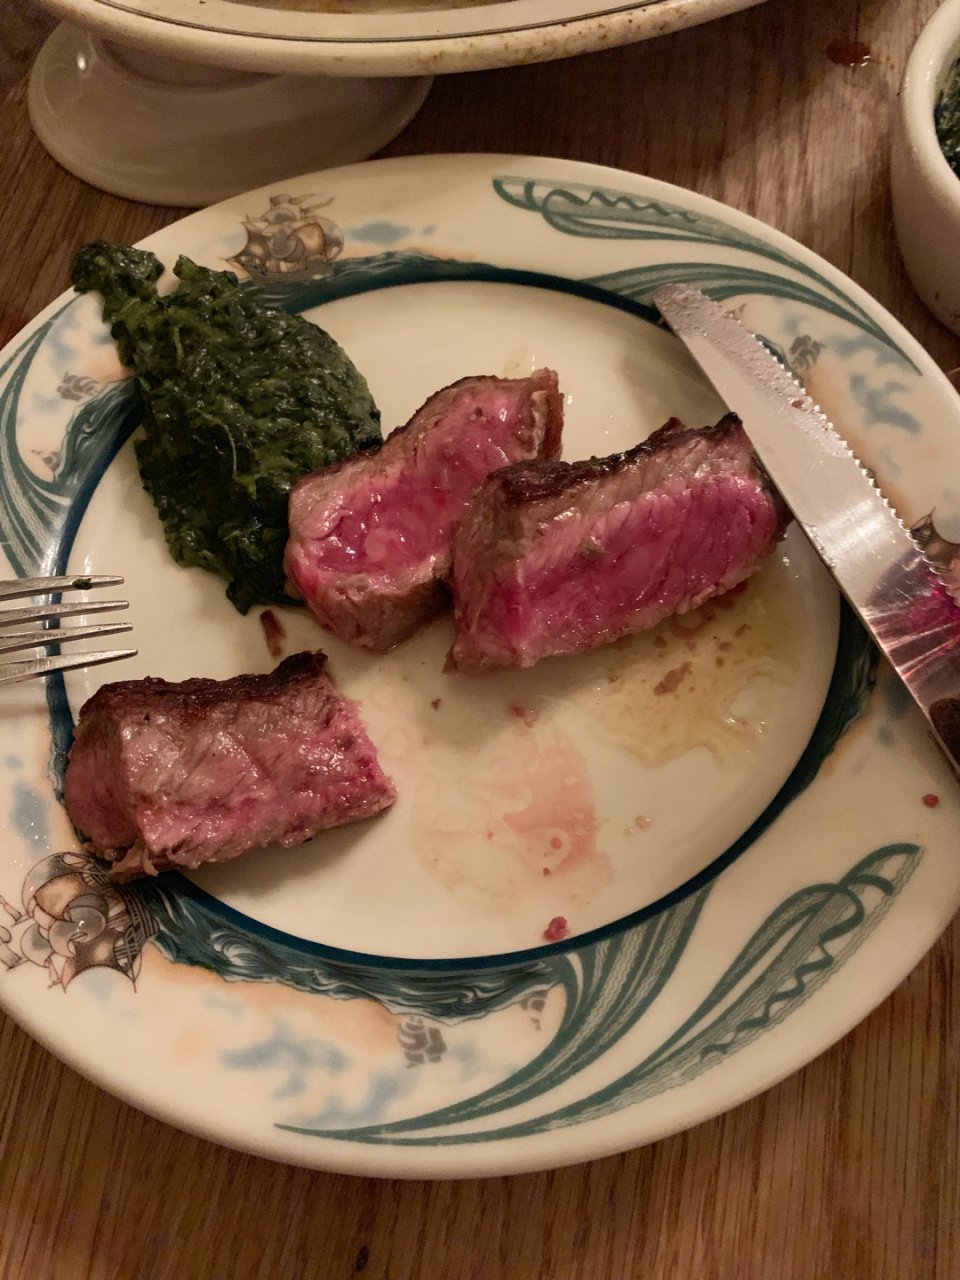 Peter Luger,牛排,五分熟,三分熟